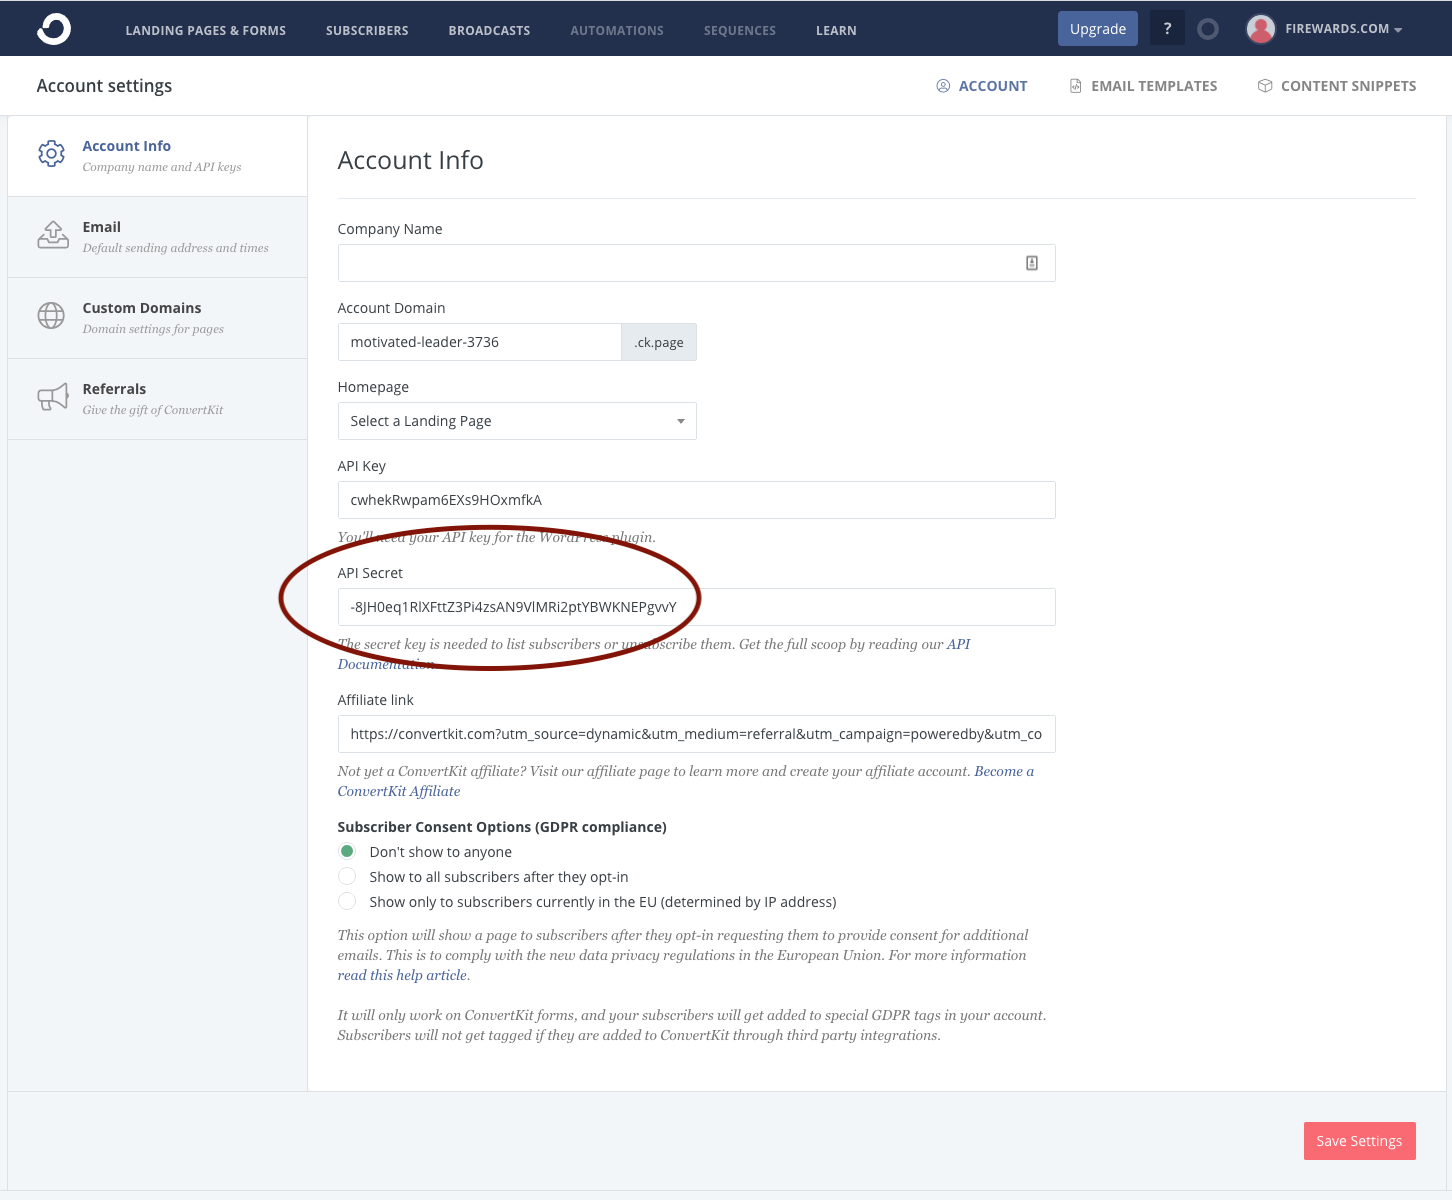 Firewards and ConvertKit Friend Referral Account Settings